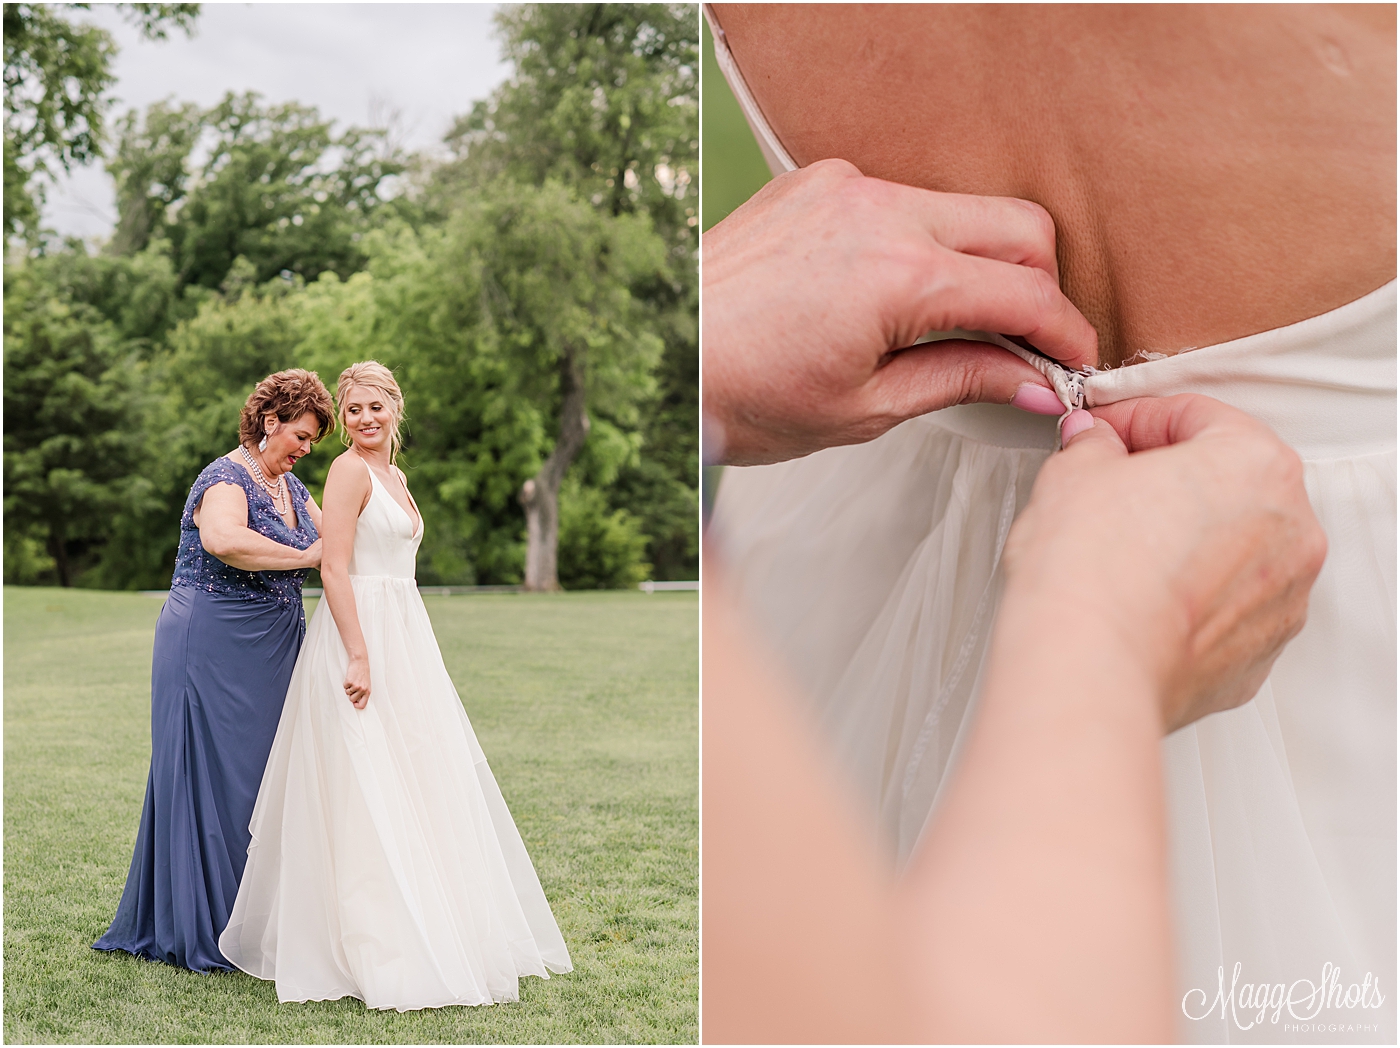 MaggShots Photography, DFW Wedding Photographer, Firefly Gardens Wedding Photographer, Firefly Gardens, Wedding Photographer, Firefly Gardens wedding, Firefly Gardens Wedding, wedding details, bride, getting ready, wedding gown, mother and daughter